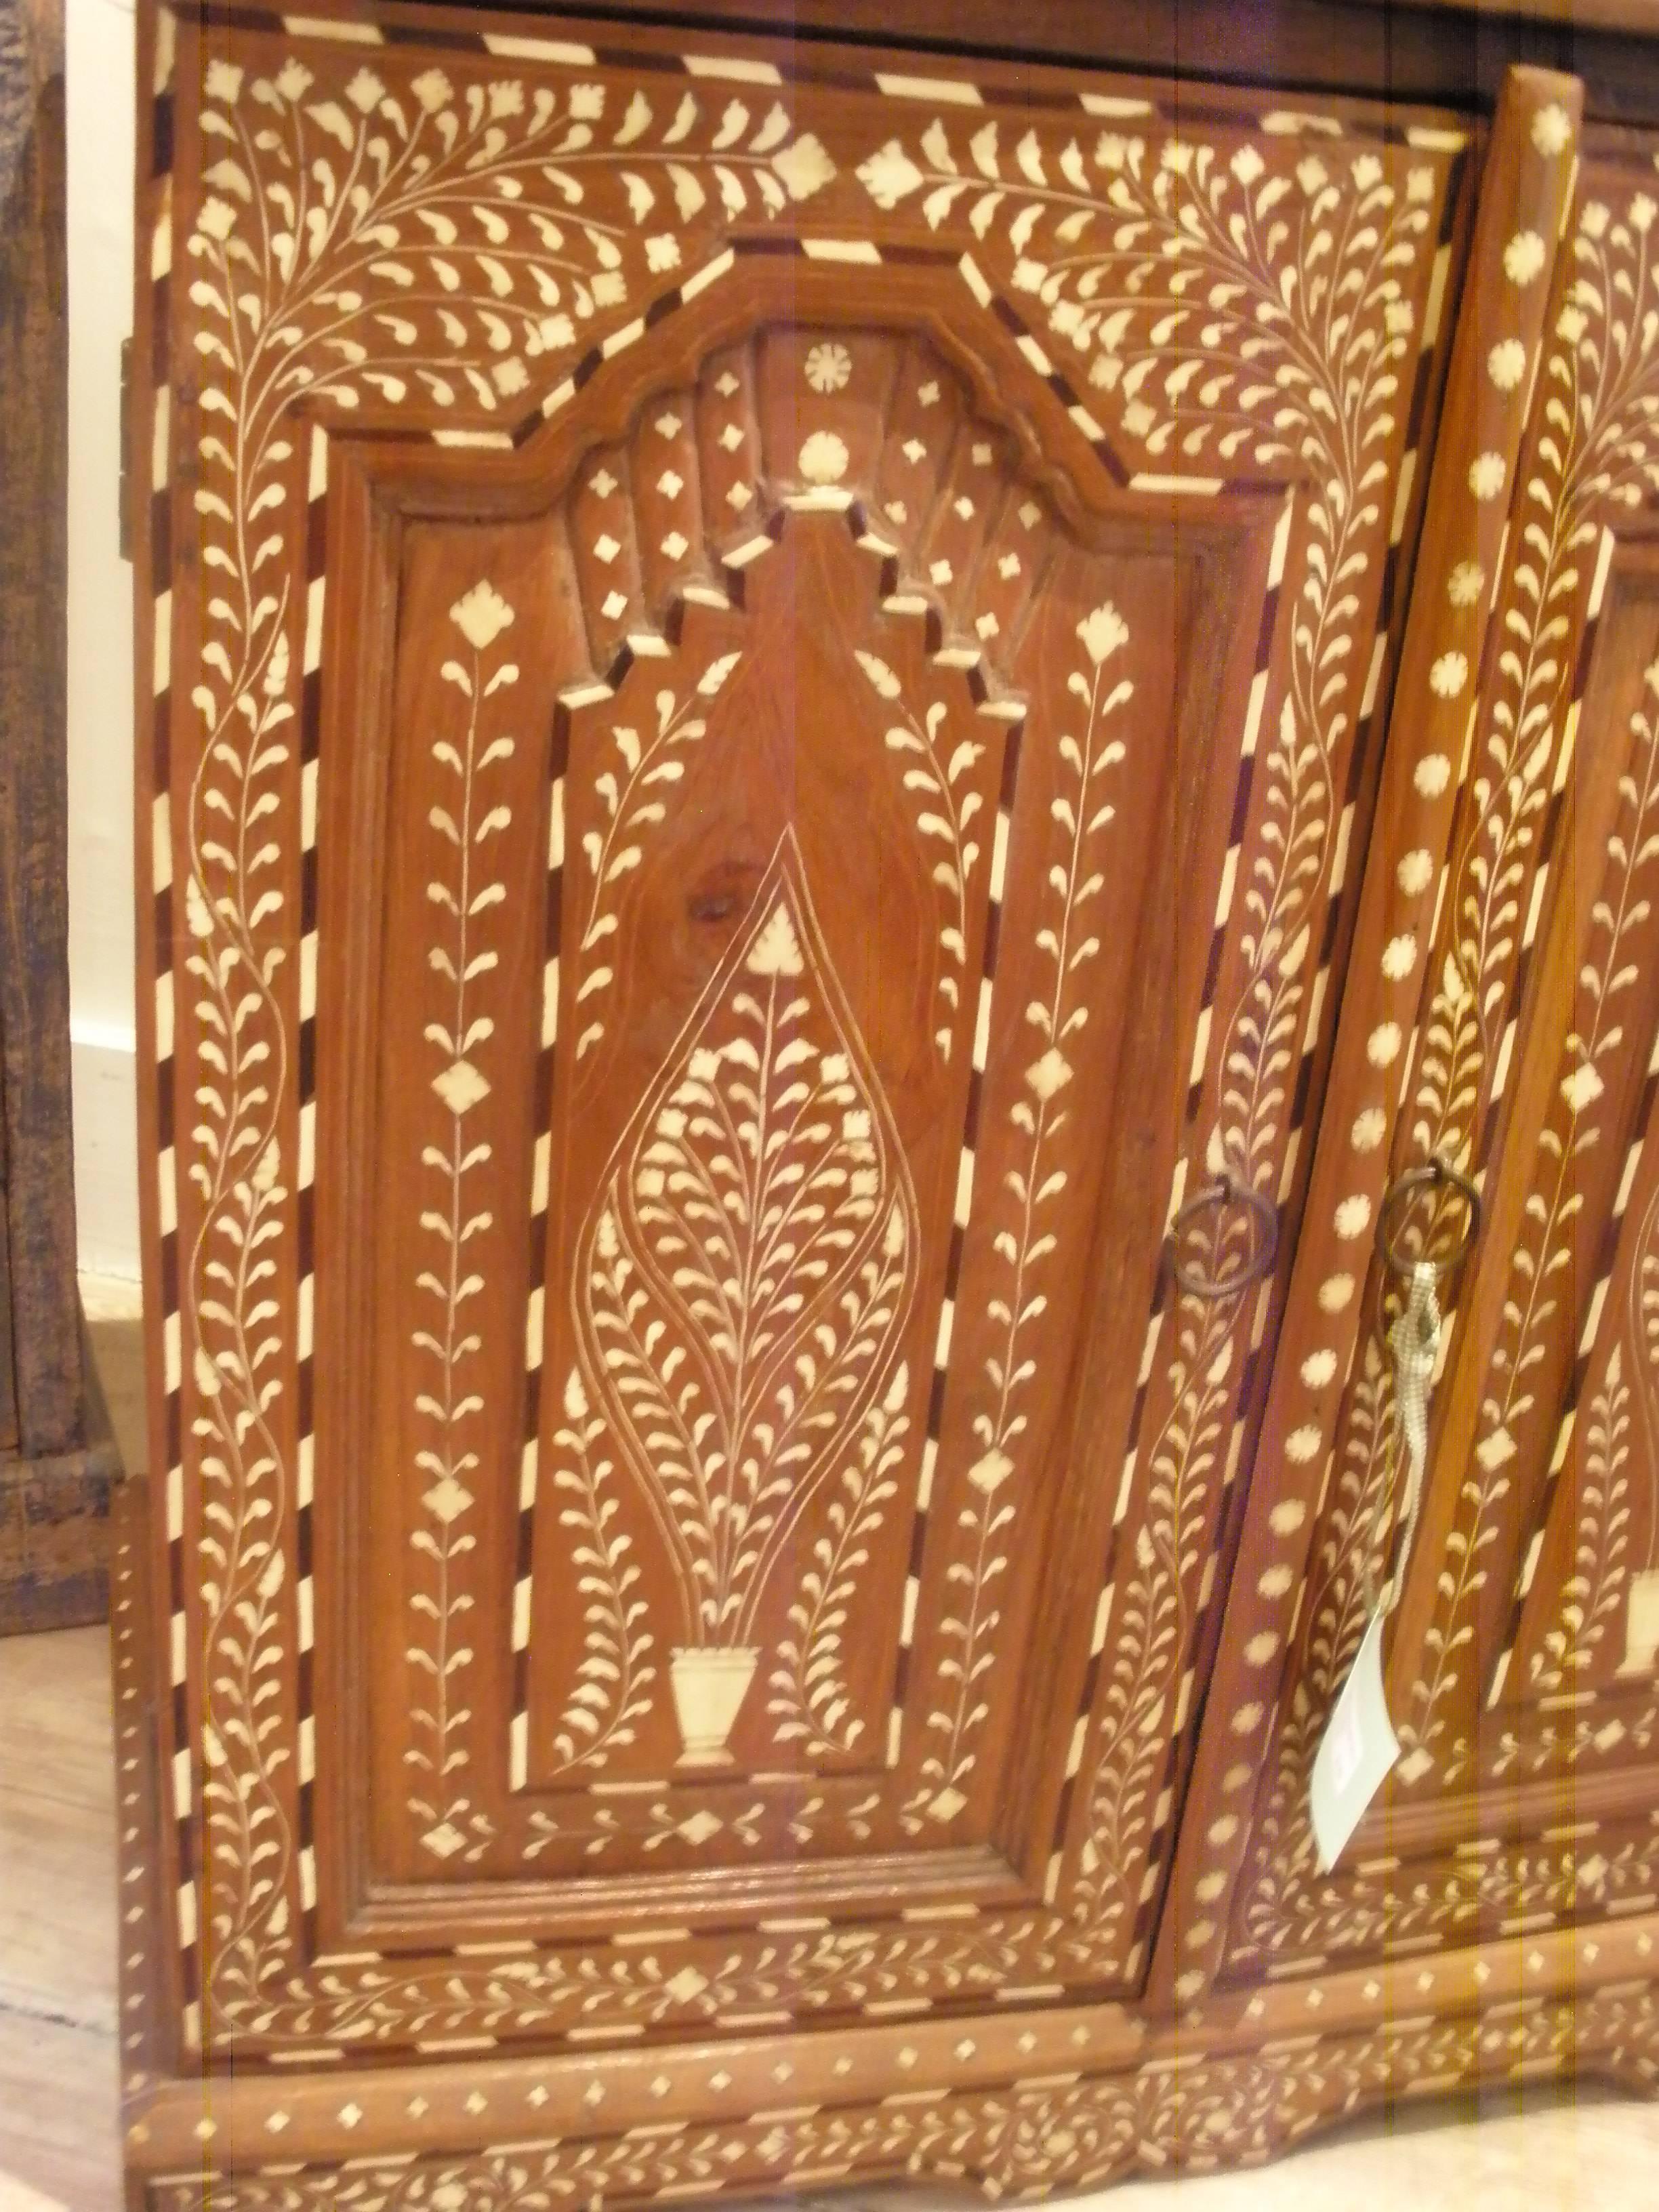 A fabulously intricate bone inlay teak cabinet with interior dividers and double door fronts. The workmanship on this piece is incredible given the small sizes and shapes of the of the inlay. It's always easier to inlay large, smooth-edged pieces,